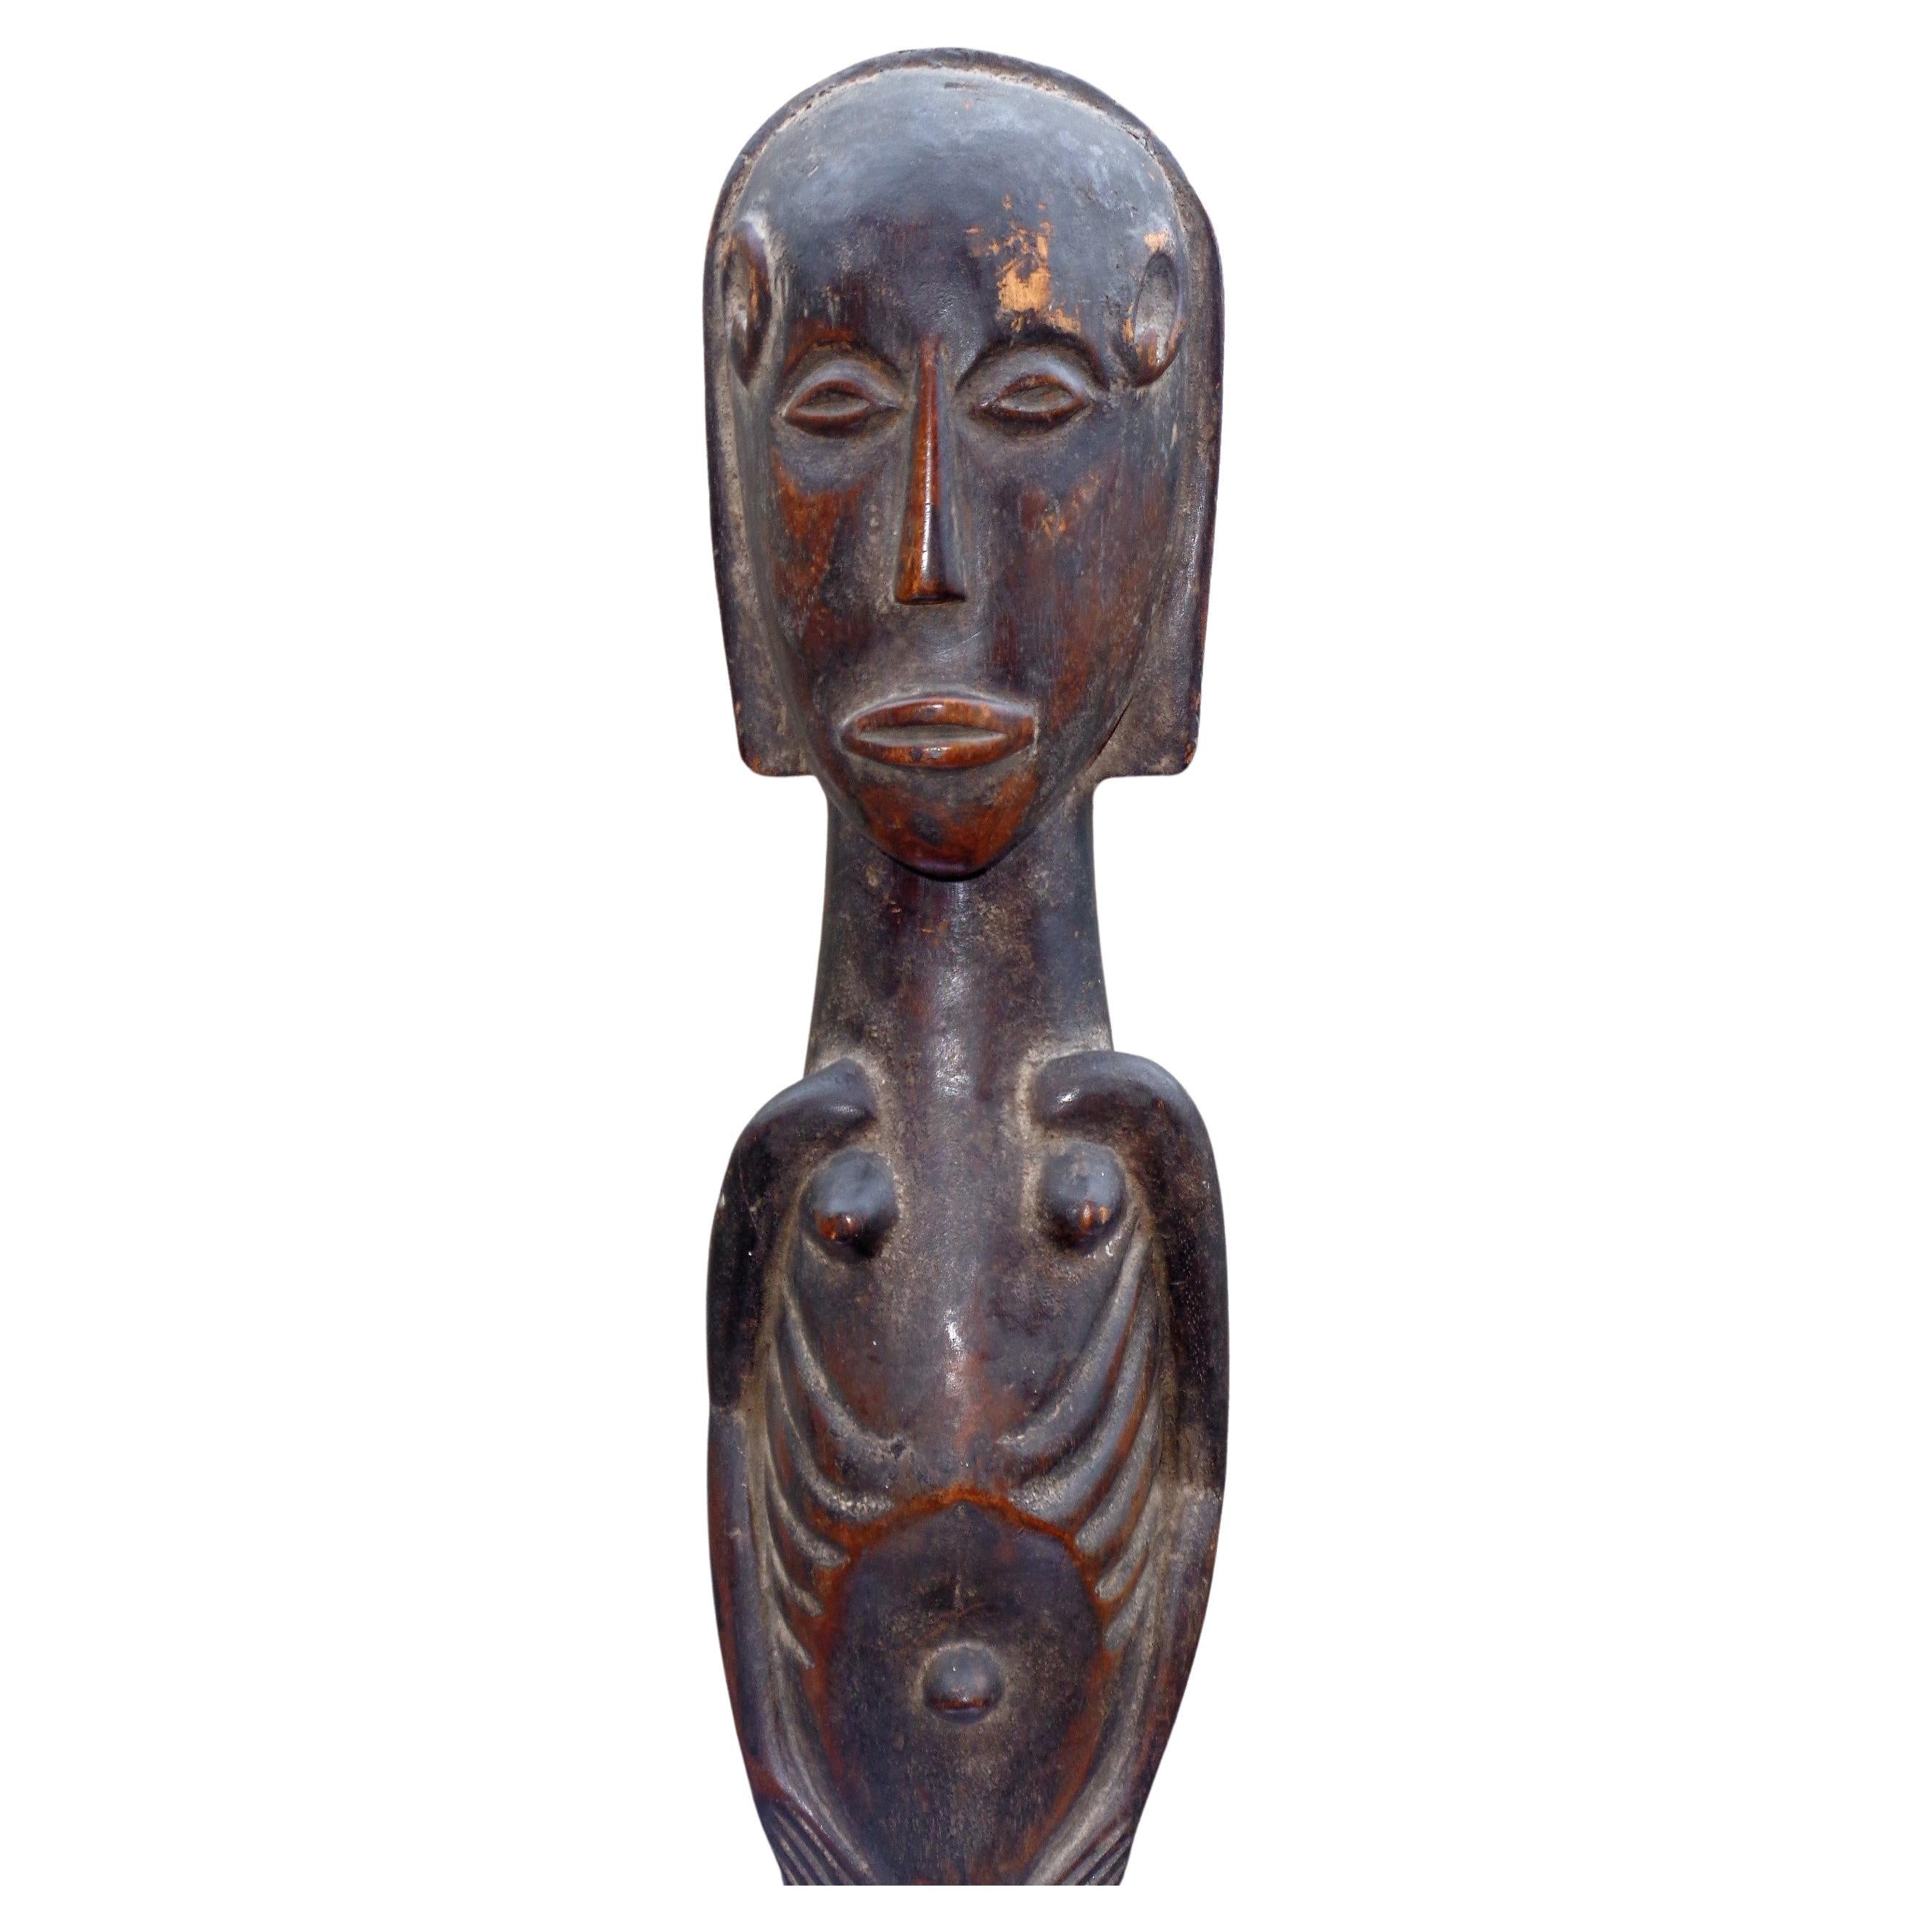  Oceanic islands carved hardwood standing male figure  w/ finely detailed anatomical features and beautifully aged surface color wear patina. Selling w/ a custom iron stand as shown in primary image. Circa mid 20th century. Look at all pictures and